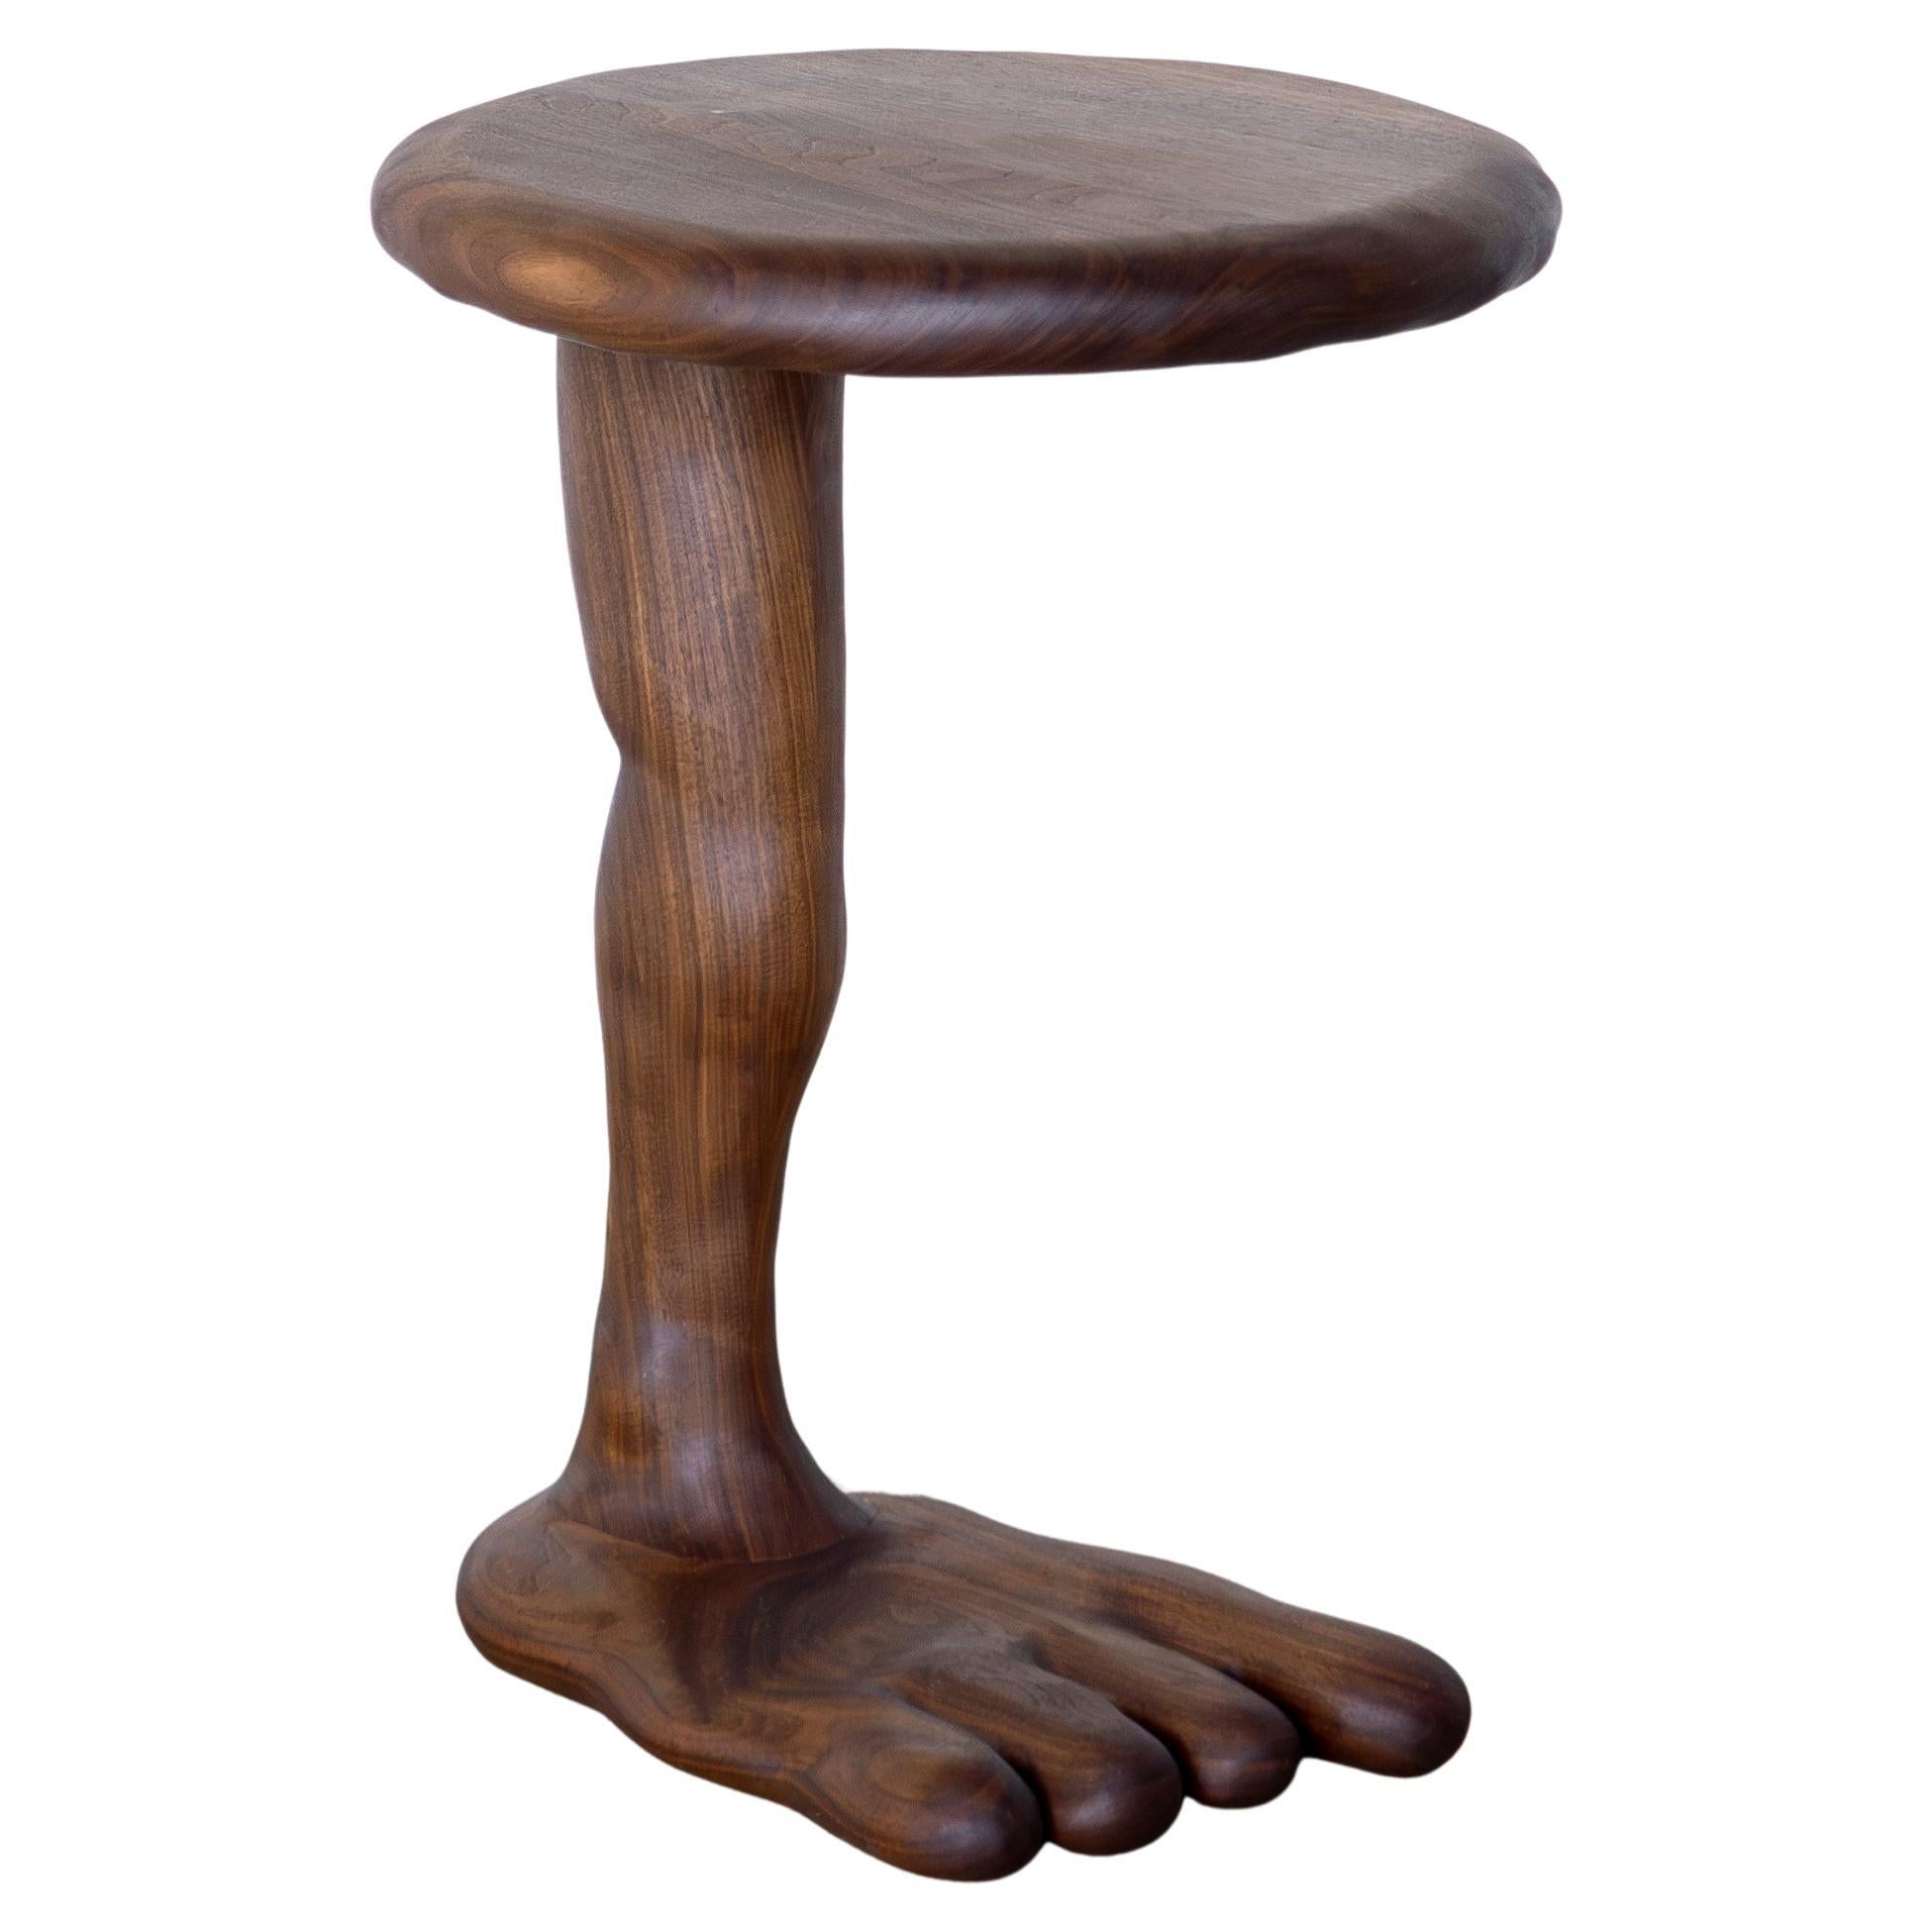 The Leg Side Table - Sculptural Table in Walnut Wood